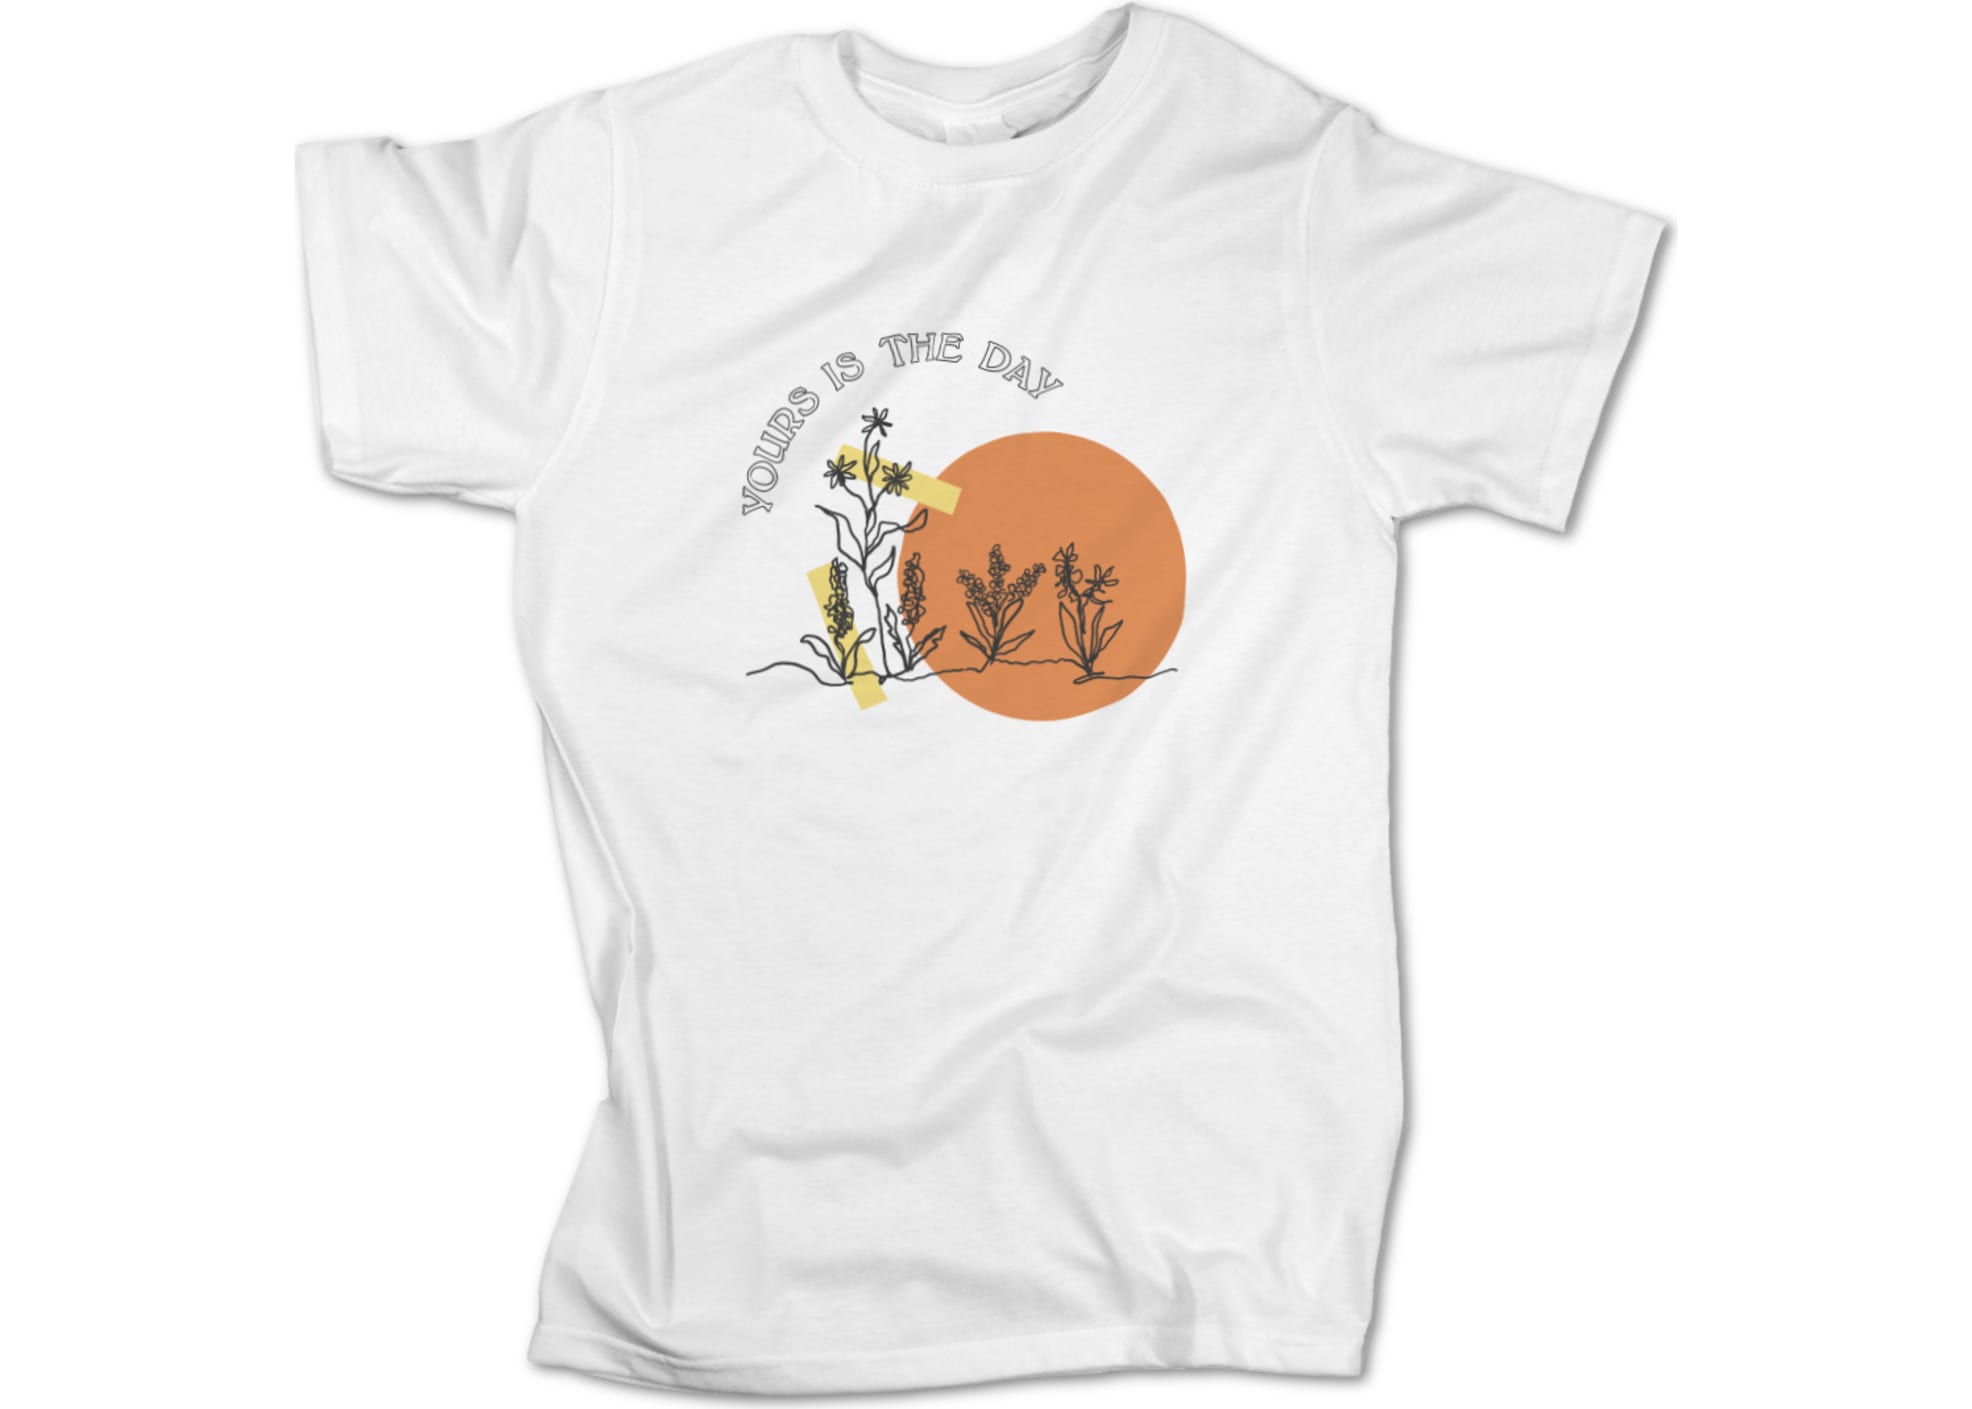 Rob ray yours is the day t shirt 1636034574